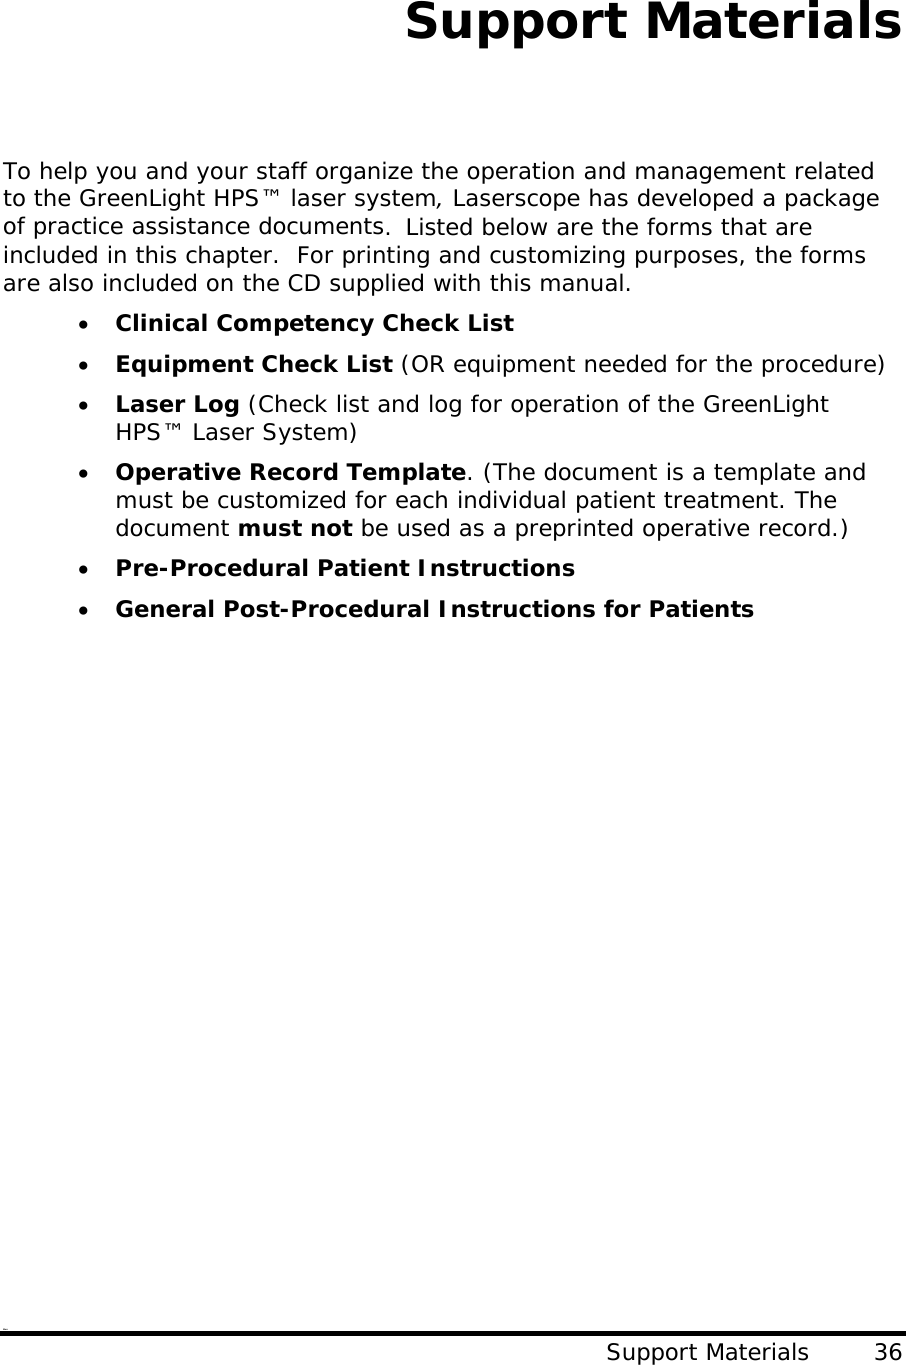 Support Materials   To help you and your staff organize the operation and management related to the GreenLight HPS™ laser system, Laserscope has developed a package of practice assistance documents.  Listed below are the forms that are included in this chapter.  For printing and customizing purposes, the forms are also included on the CD supplied with this manual. • Clinical Competency Check List • Equipment Check List (OR equipment needed for the procedure) • Laser Log (Check list and log for operation of the GreenLight HPS™ Laser System) • Operative Record Template. (The document is a template and must be customized for each individual patient treatment. The document must not be used as a preprinted operative record.) • Pre-Procedural Patient Instructions • General Post-Procedural Instructions for Patients    Warr Support Materials        36                     